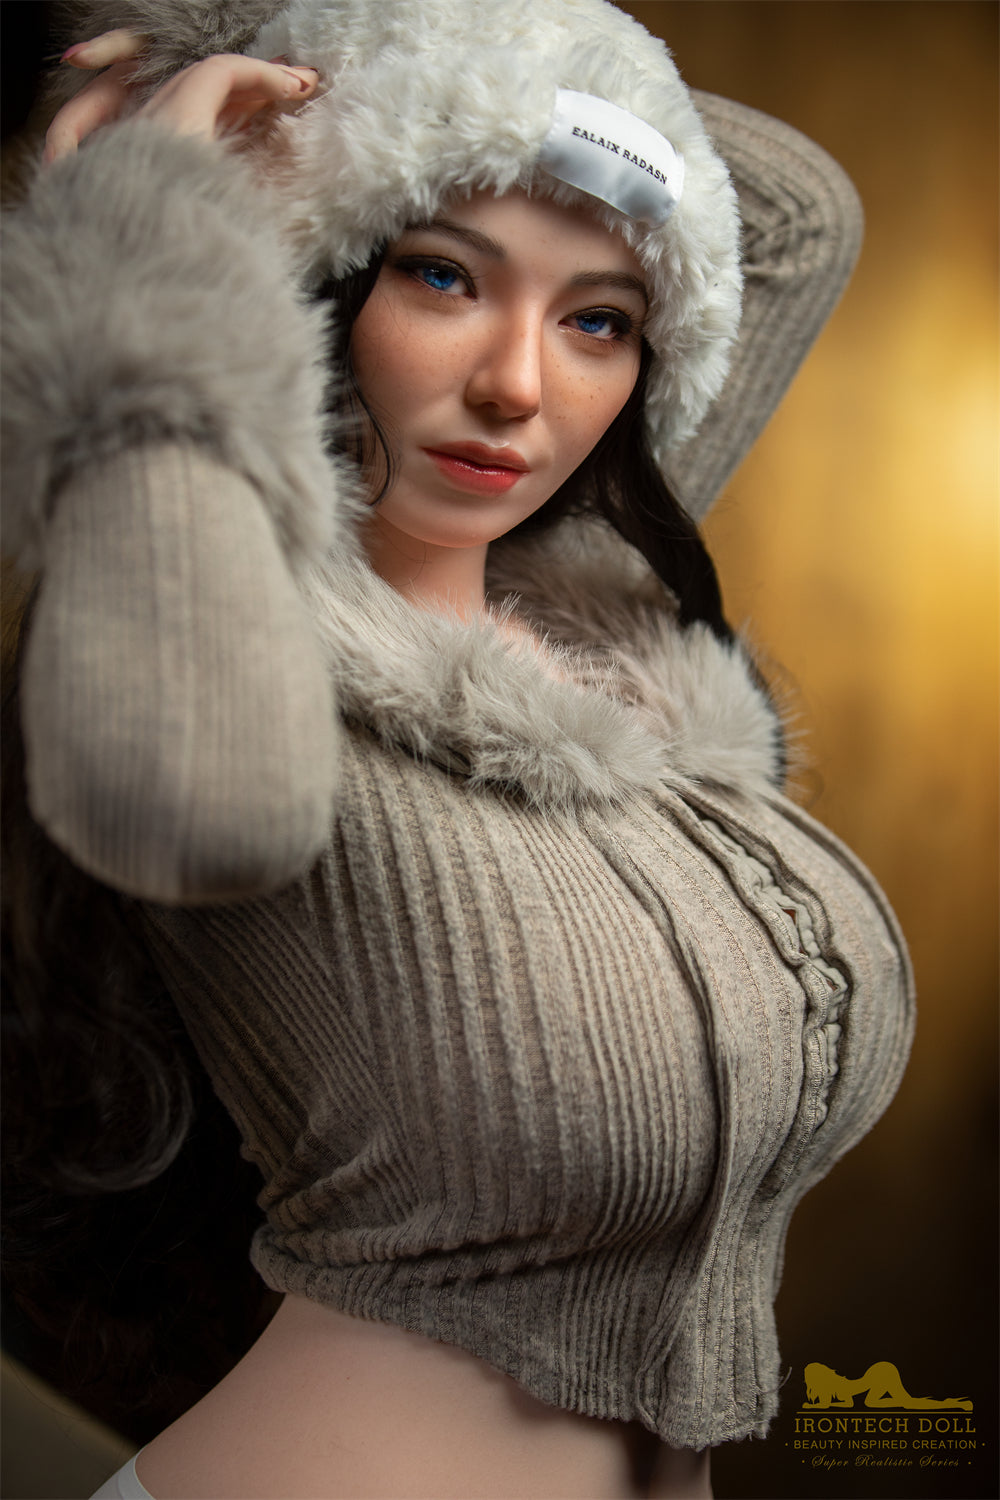 Irontech Doll 165 cm F Silicone - Maria | Buy Sex Dolls at DOLLS ACTUALLY